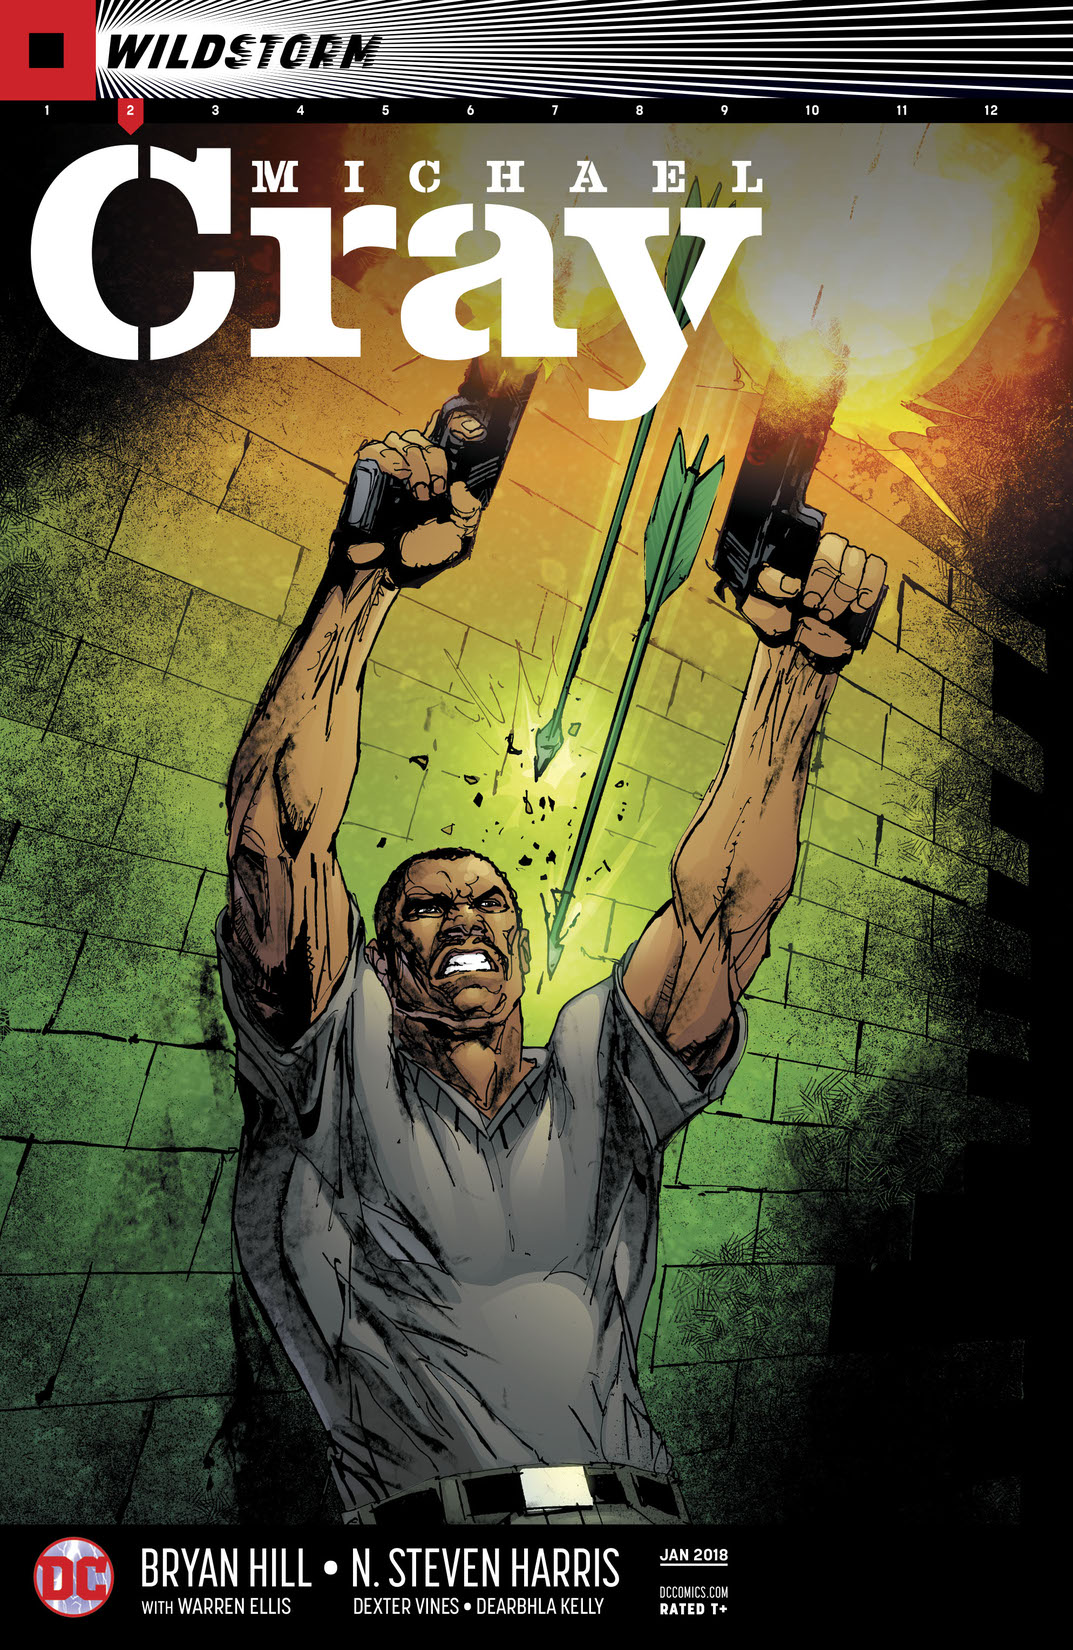 The Wild Storm: Michael Cray #2 preview images